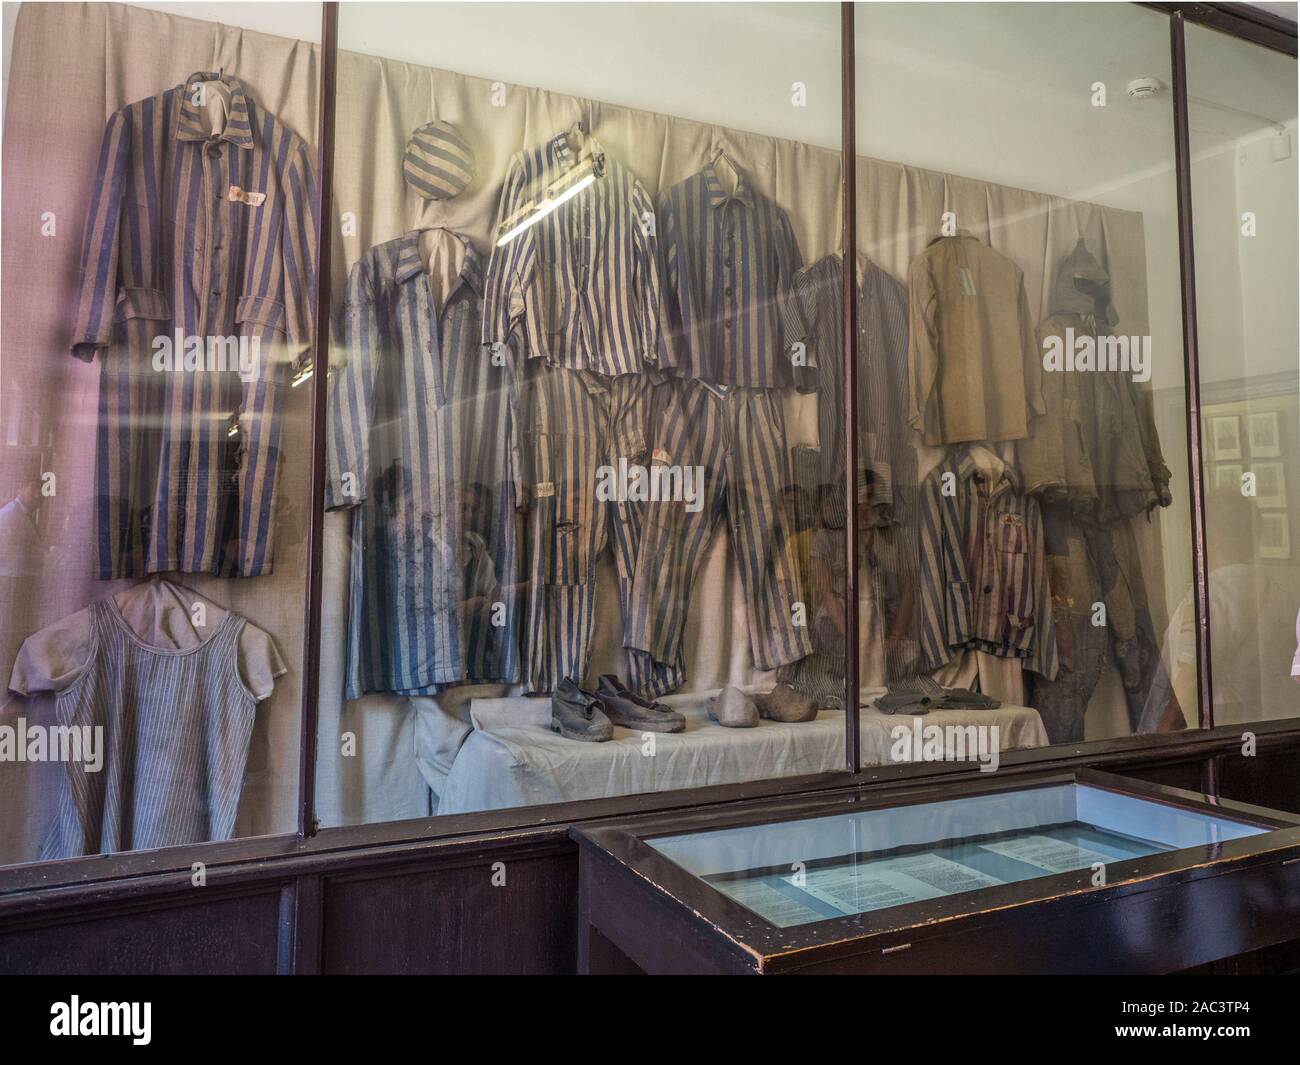 Auschwitz, Oświęcim, Poland - June 05, 2019: Showcase eith everyday clothes of prisoners in Auschwitz. The largest Nazi concentration camp in Europe d Stock Photo